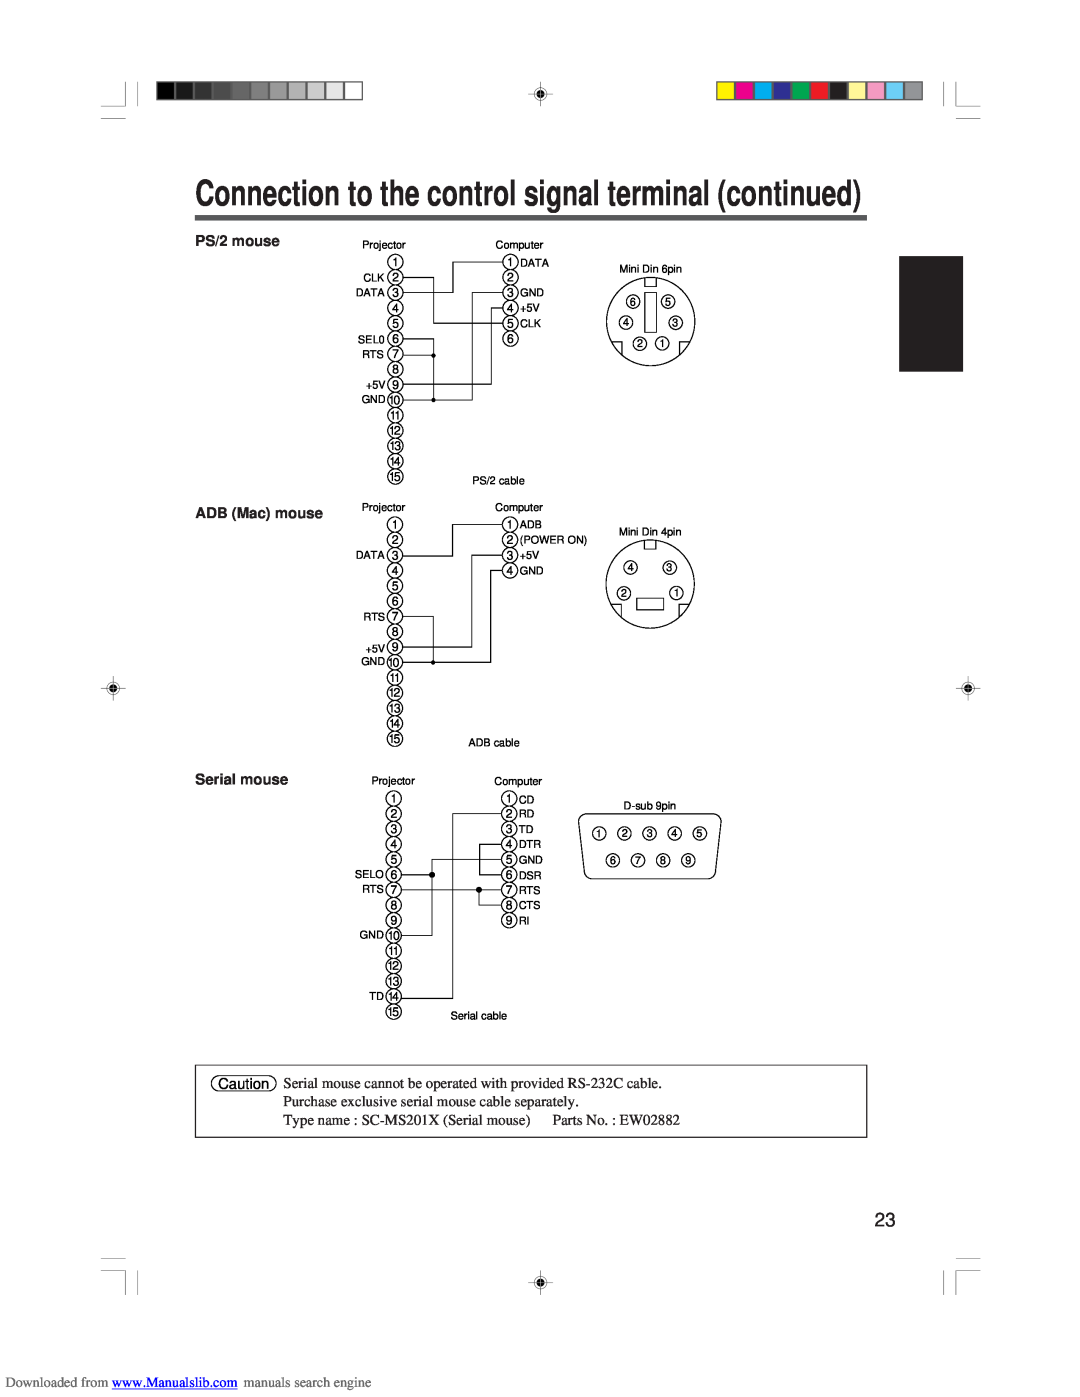 Hitachi CP-X955E specifications Connection to the control signal terminal continued, PS/2 mouse ADB Mac mouse Serial mouse 